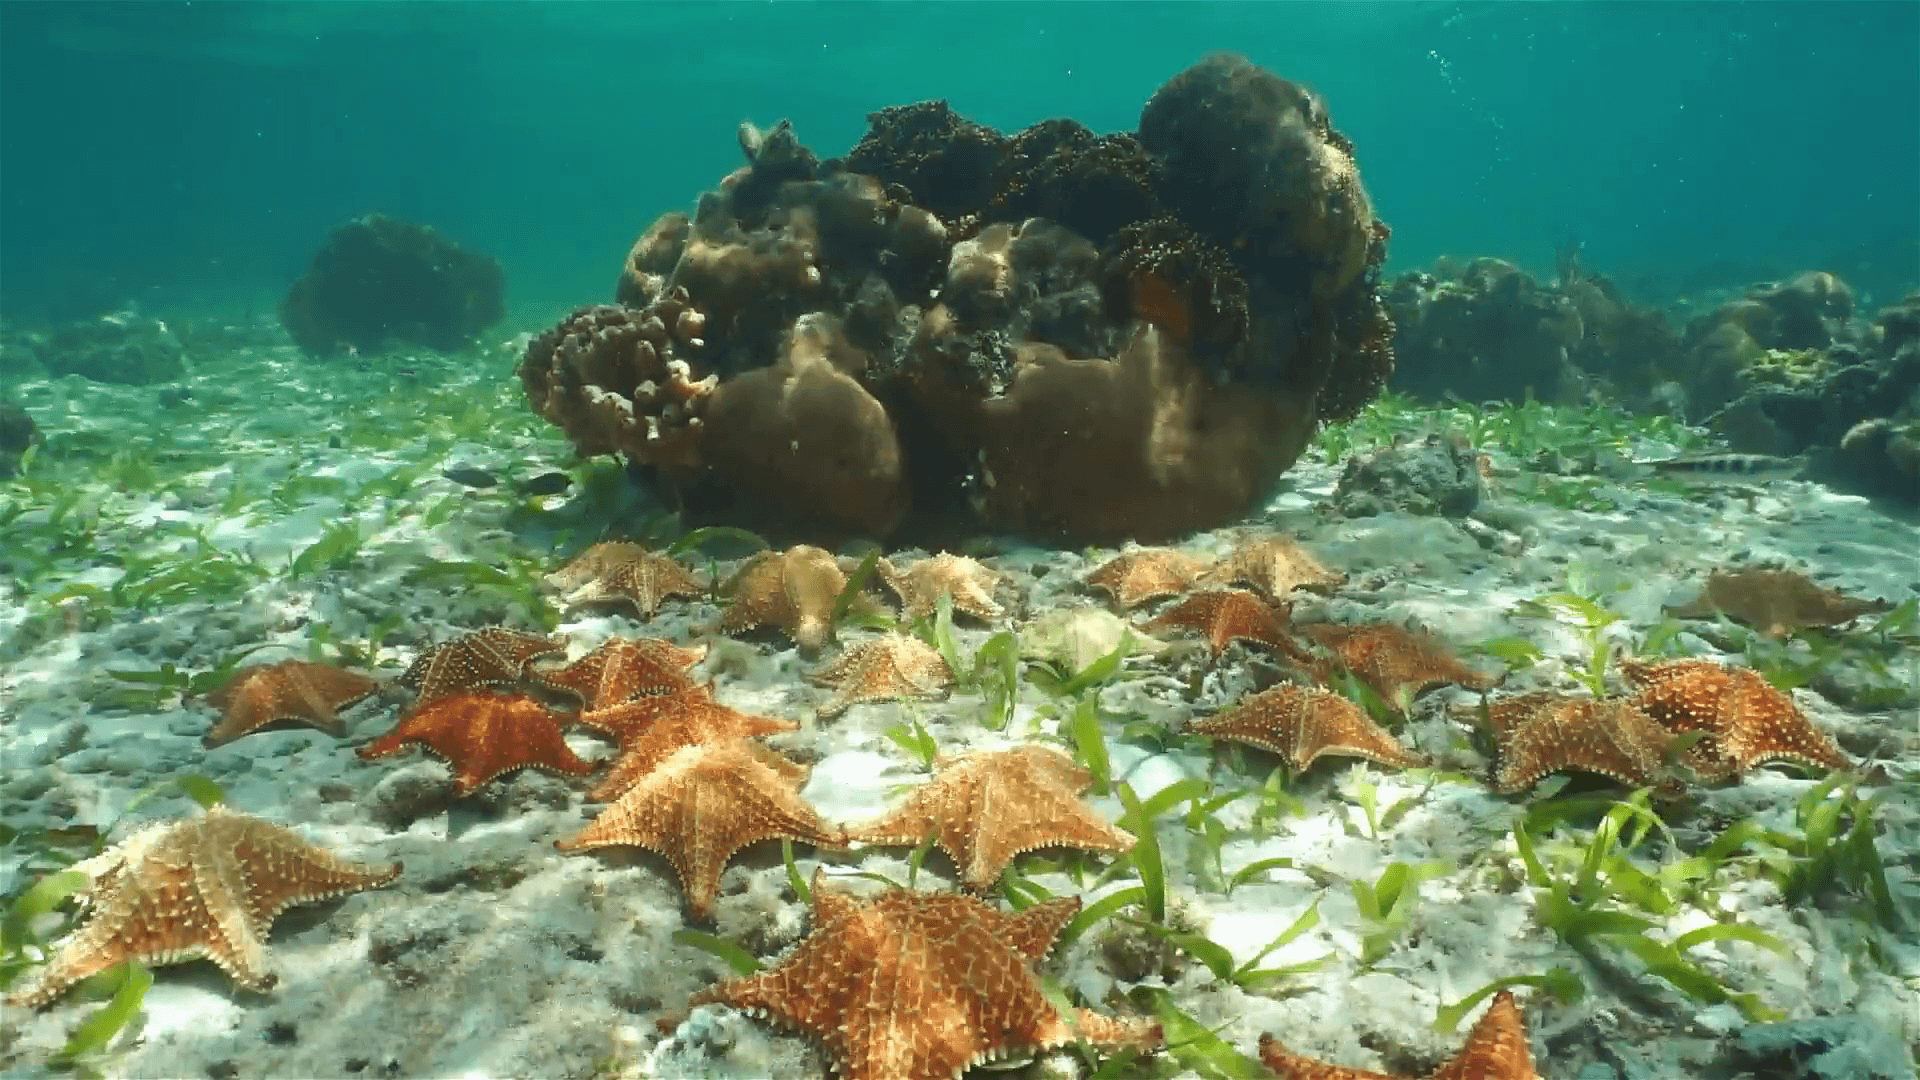 Group of starfish, Cushion sea star, underwater on the seabed